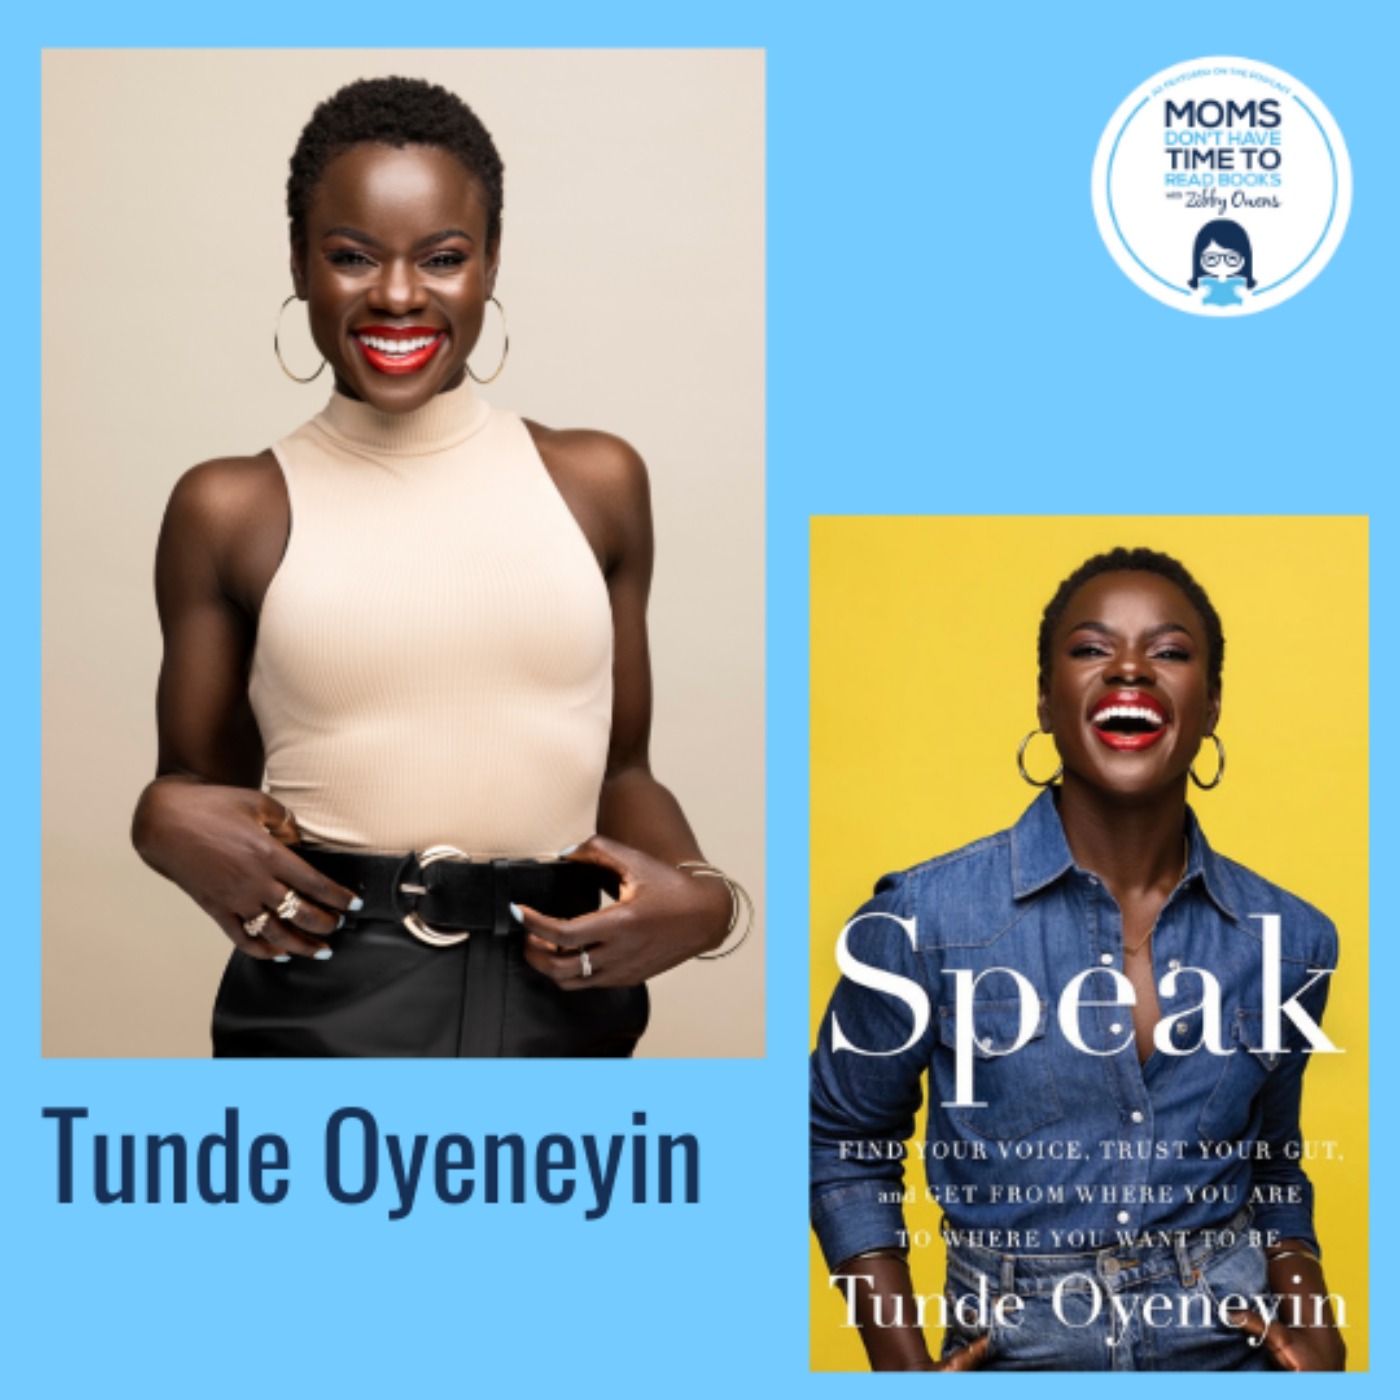 Tunde Oyeneyin, SPEAK: Find Your Voice, Trust Your Gut, and Get from Where You Are to Where You Want to Be